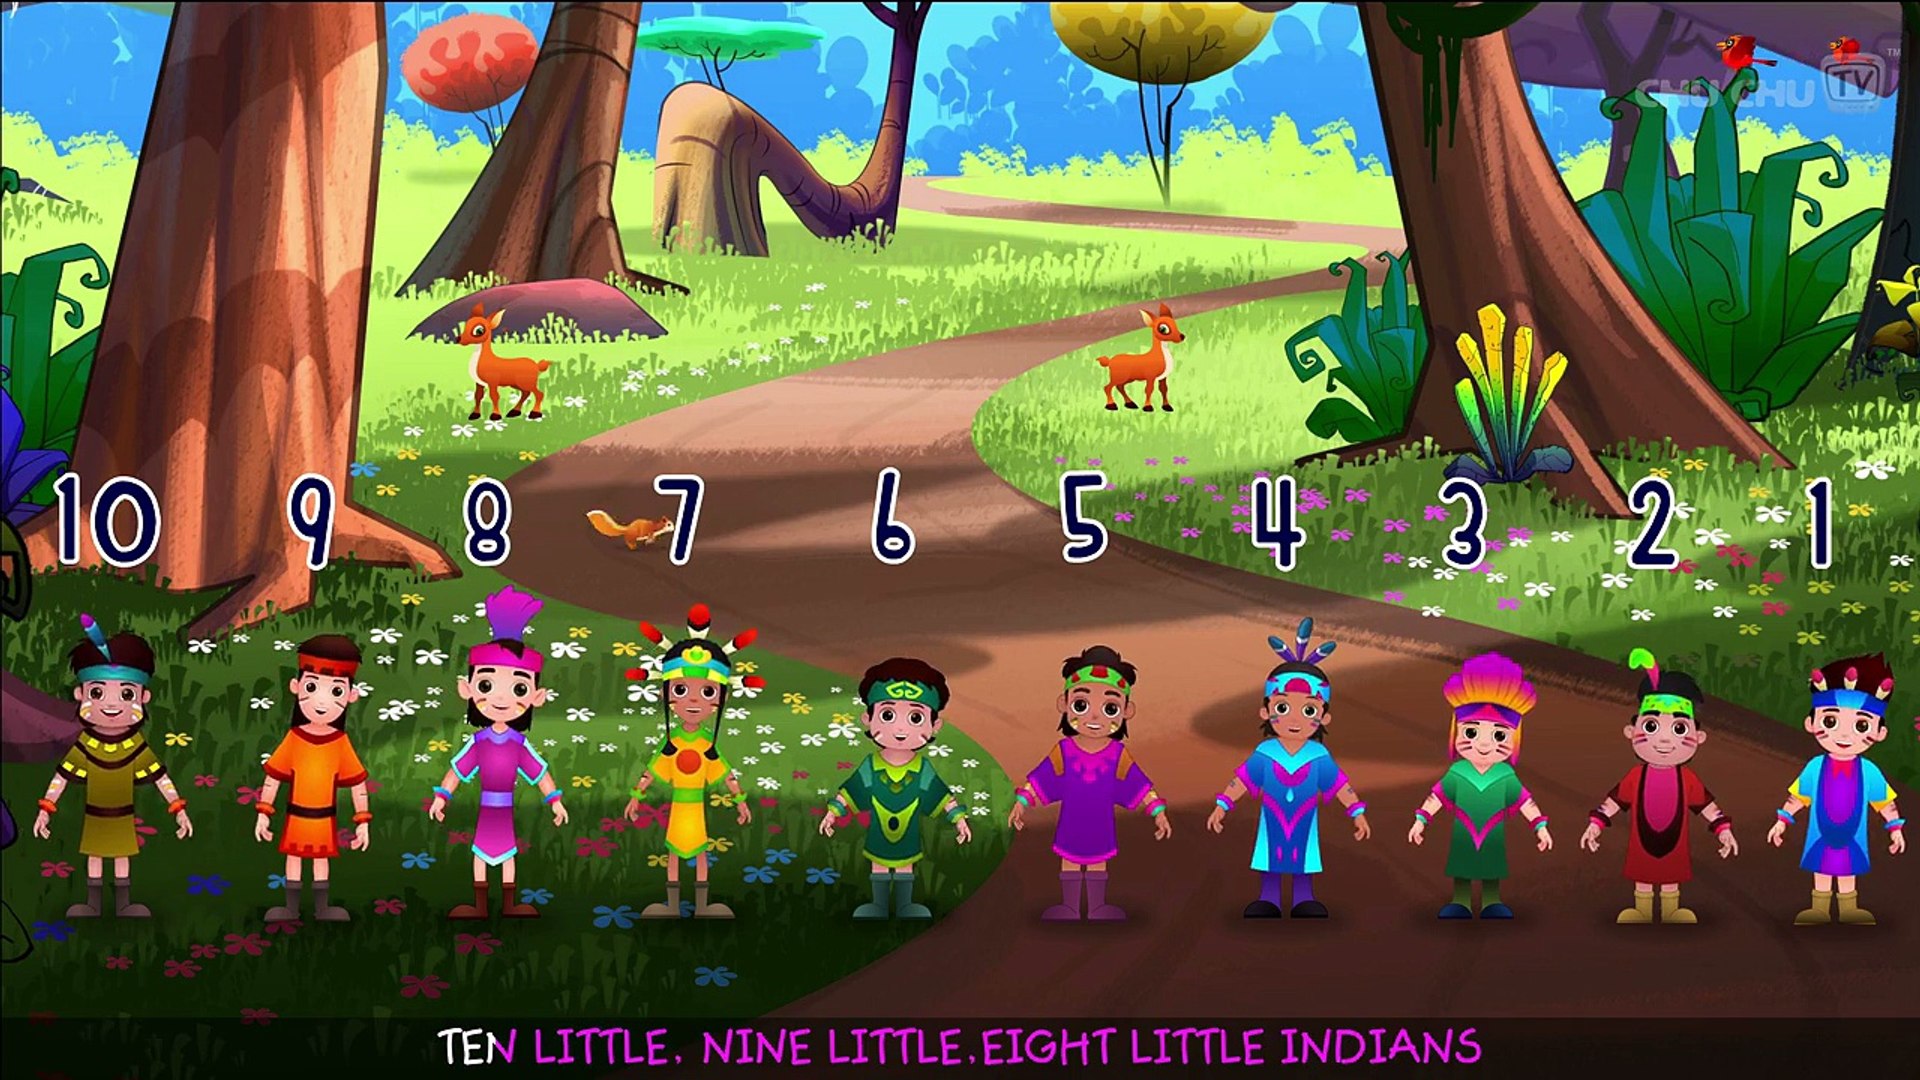 Ten Little Indians Nursery Rhyme - Popular Number Nursery Rhymes For  Children by ChuChu TV - video Dailymotion